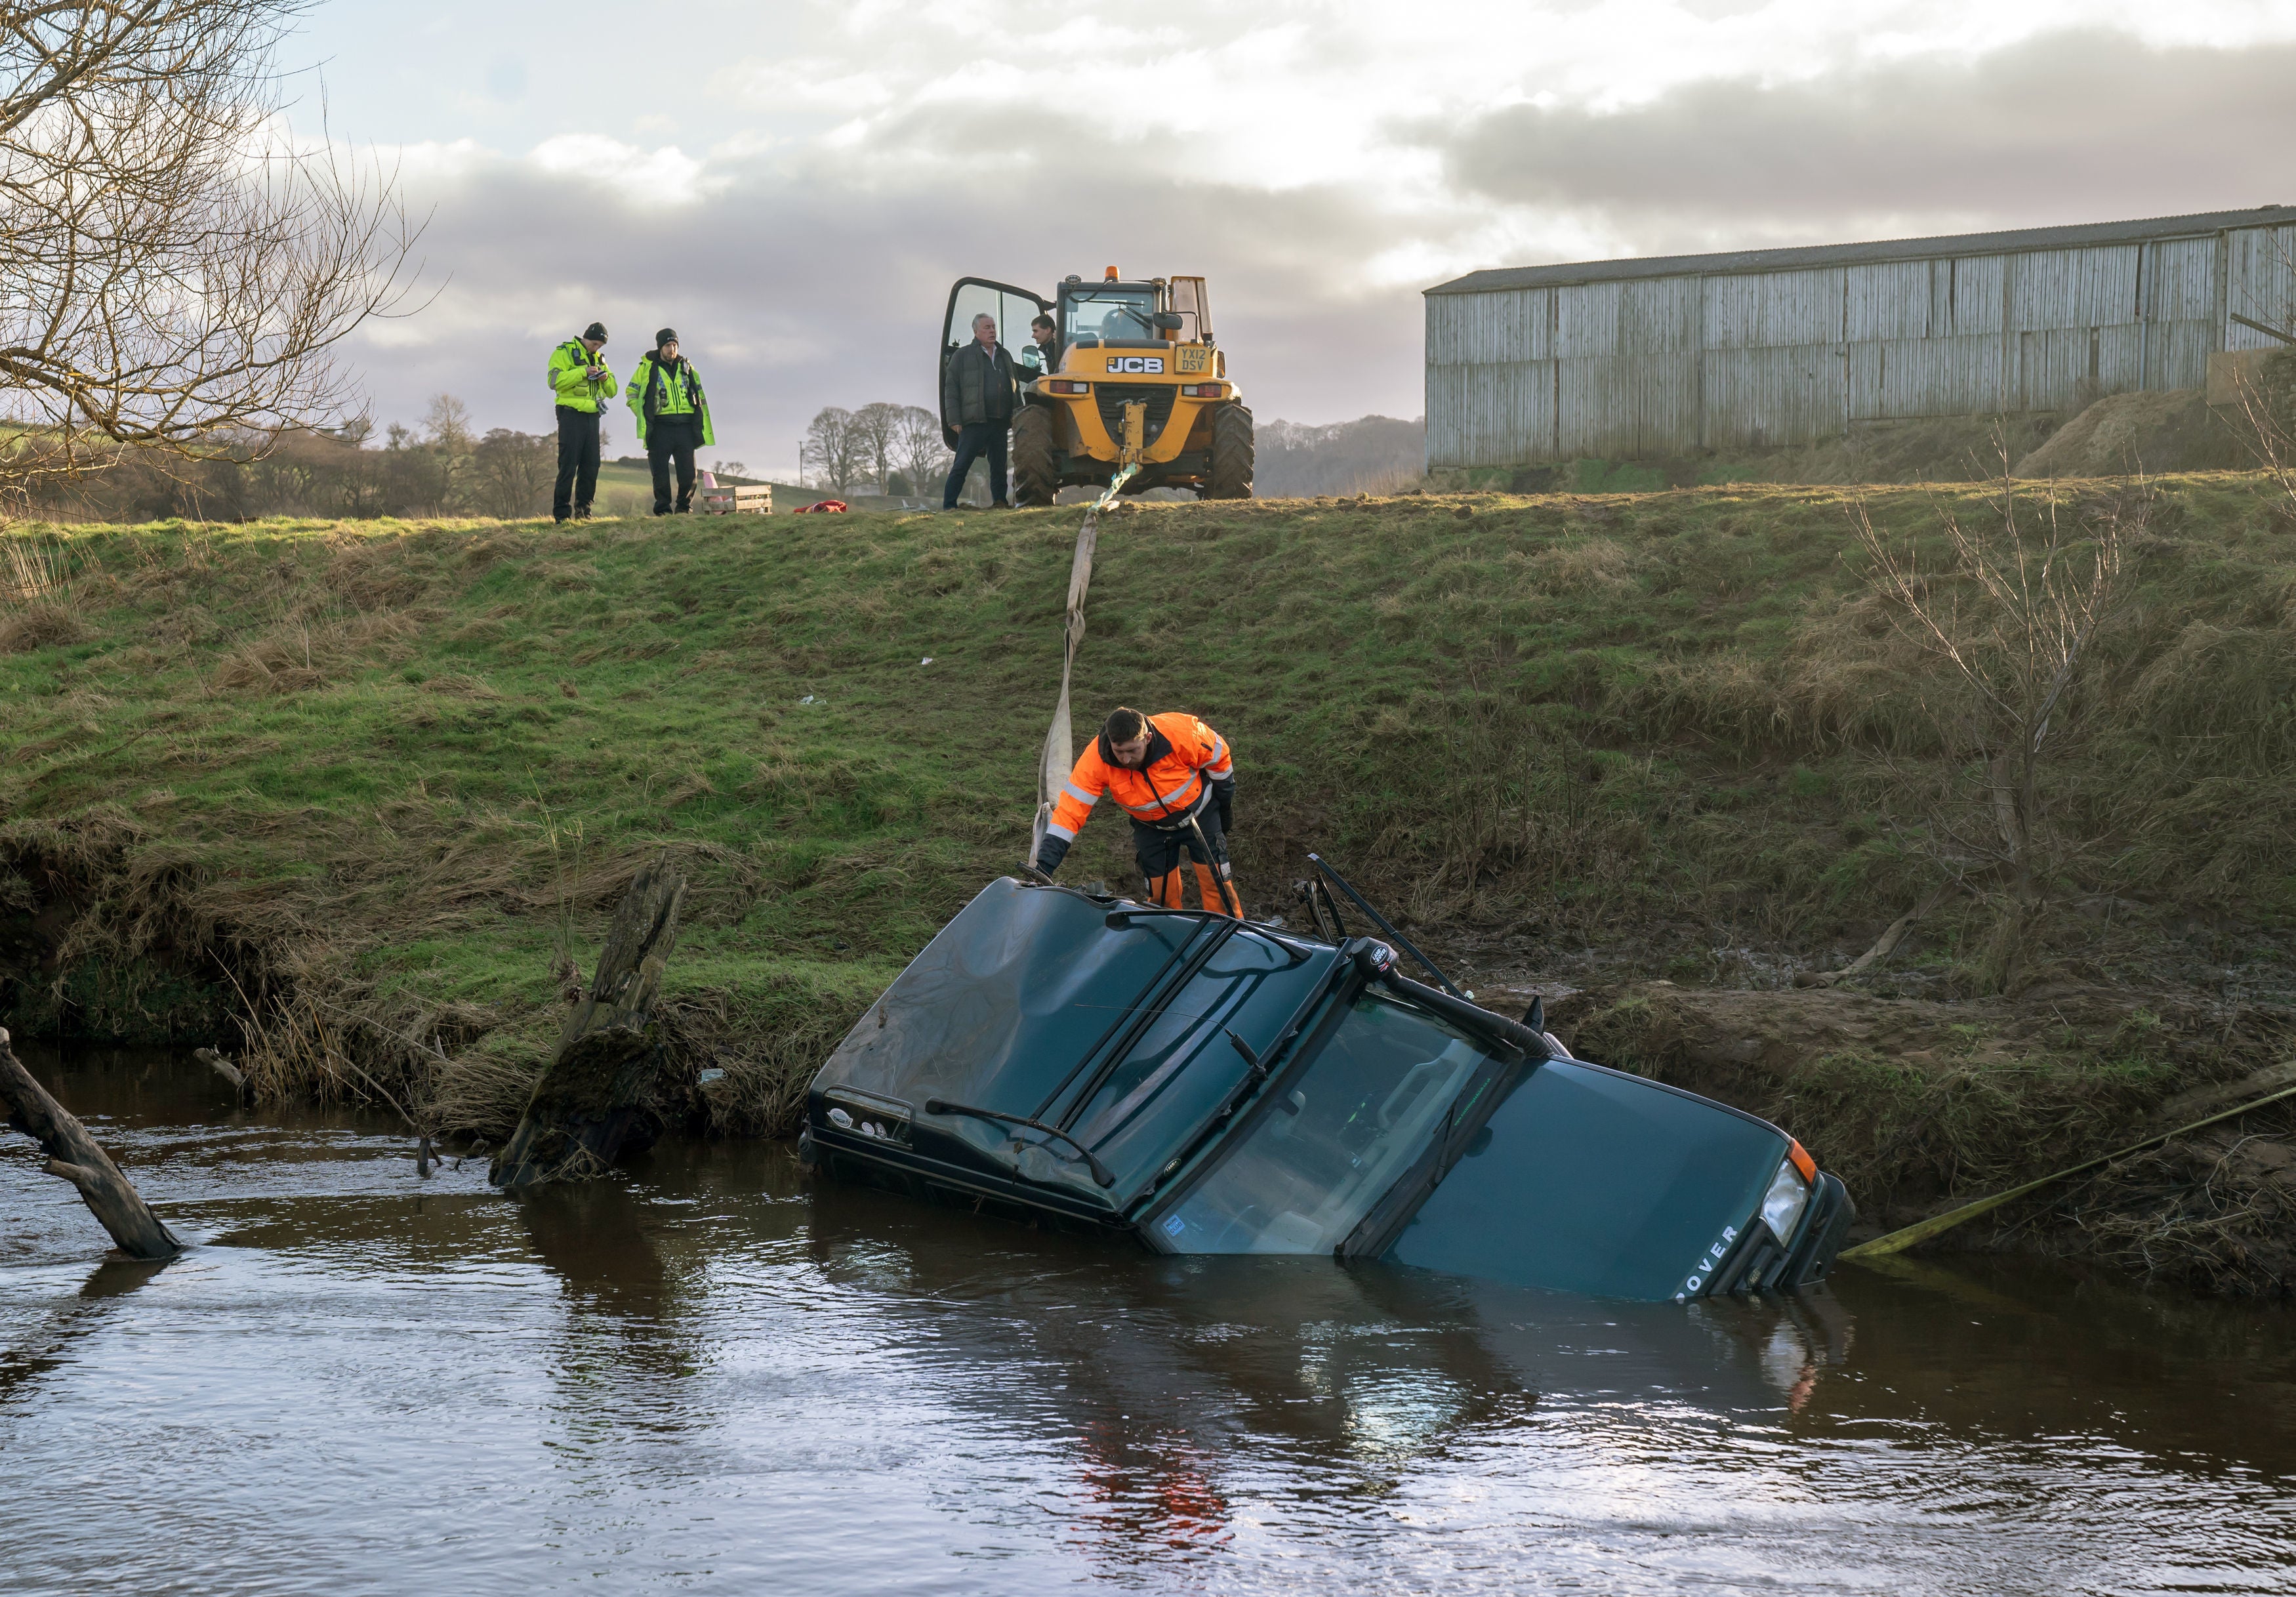 The vehicle being recovered from the River Esk